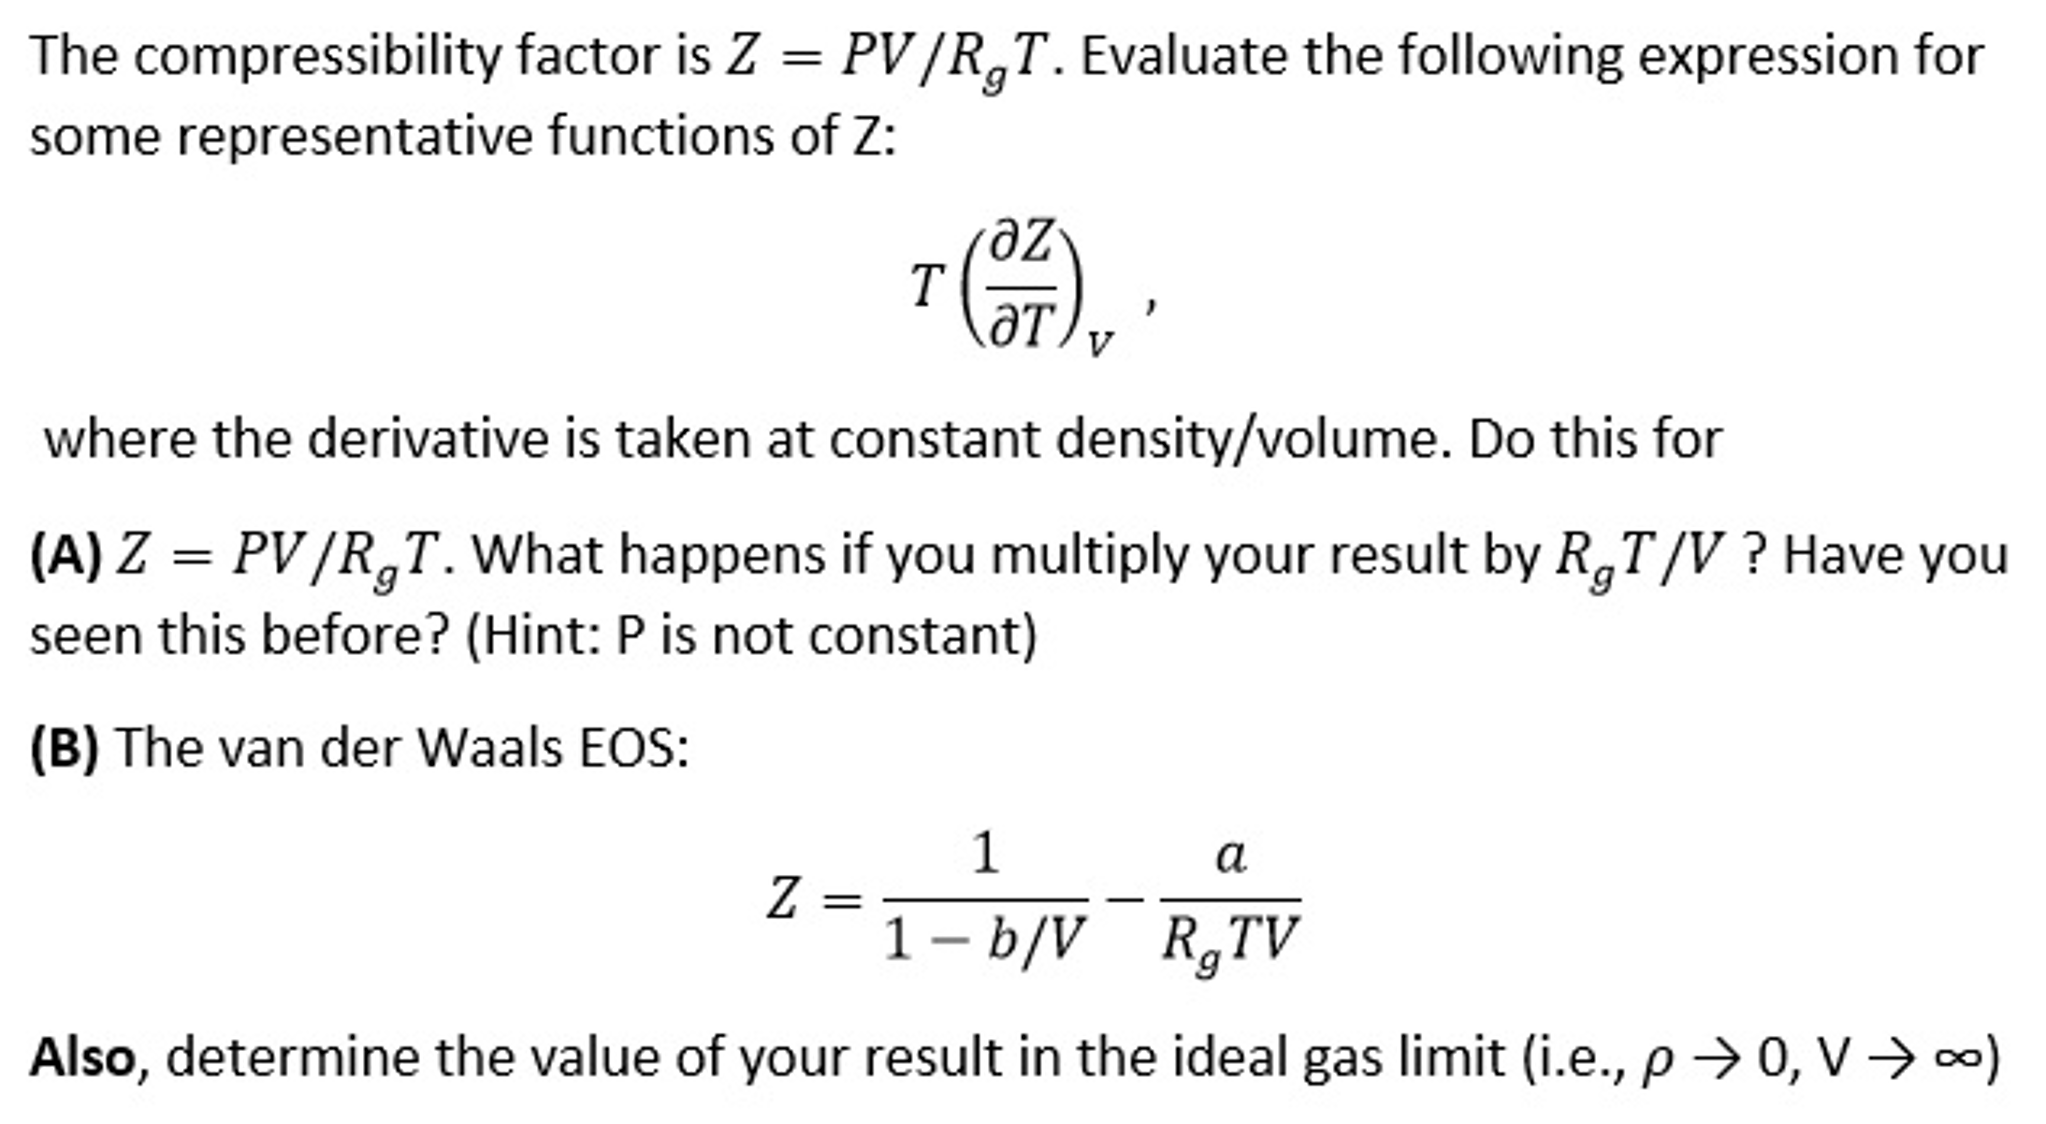 The compressibility factor is Z = PV/R_g T. Evaluate